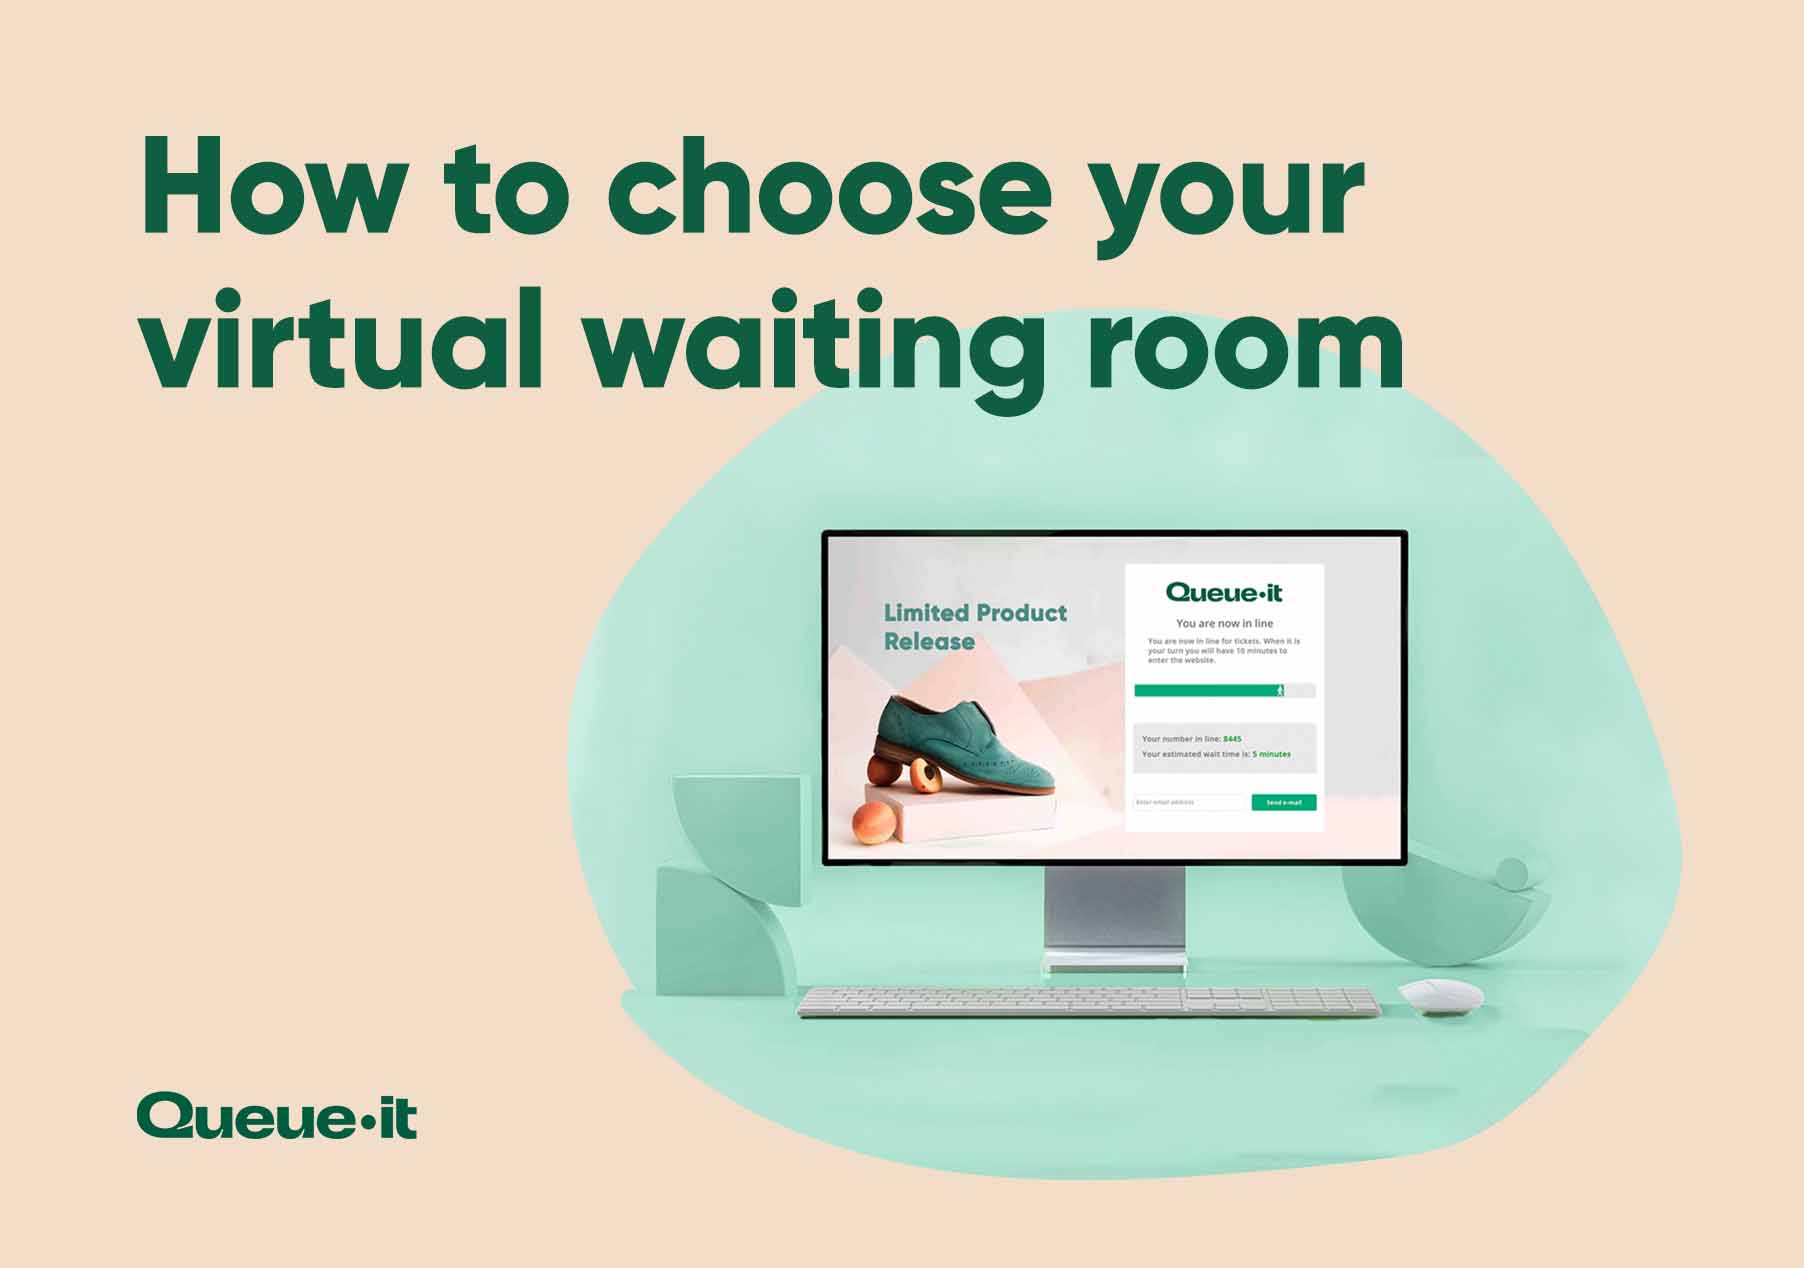 Queue-it How to Choose Your Virtual Waiting Room guide